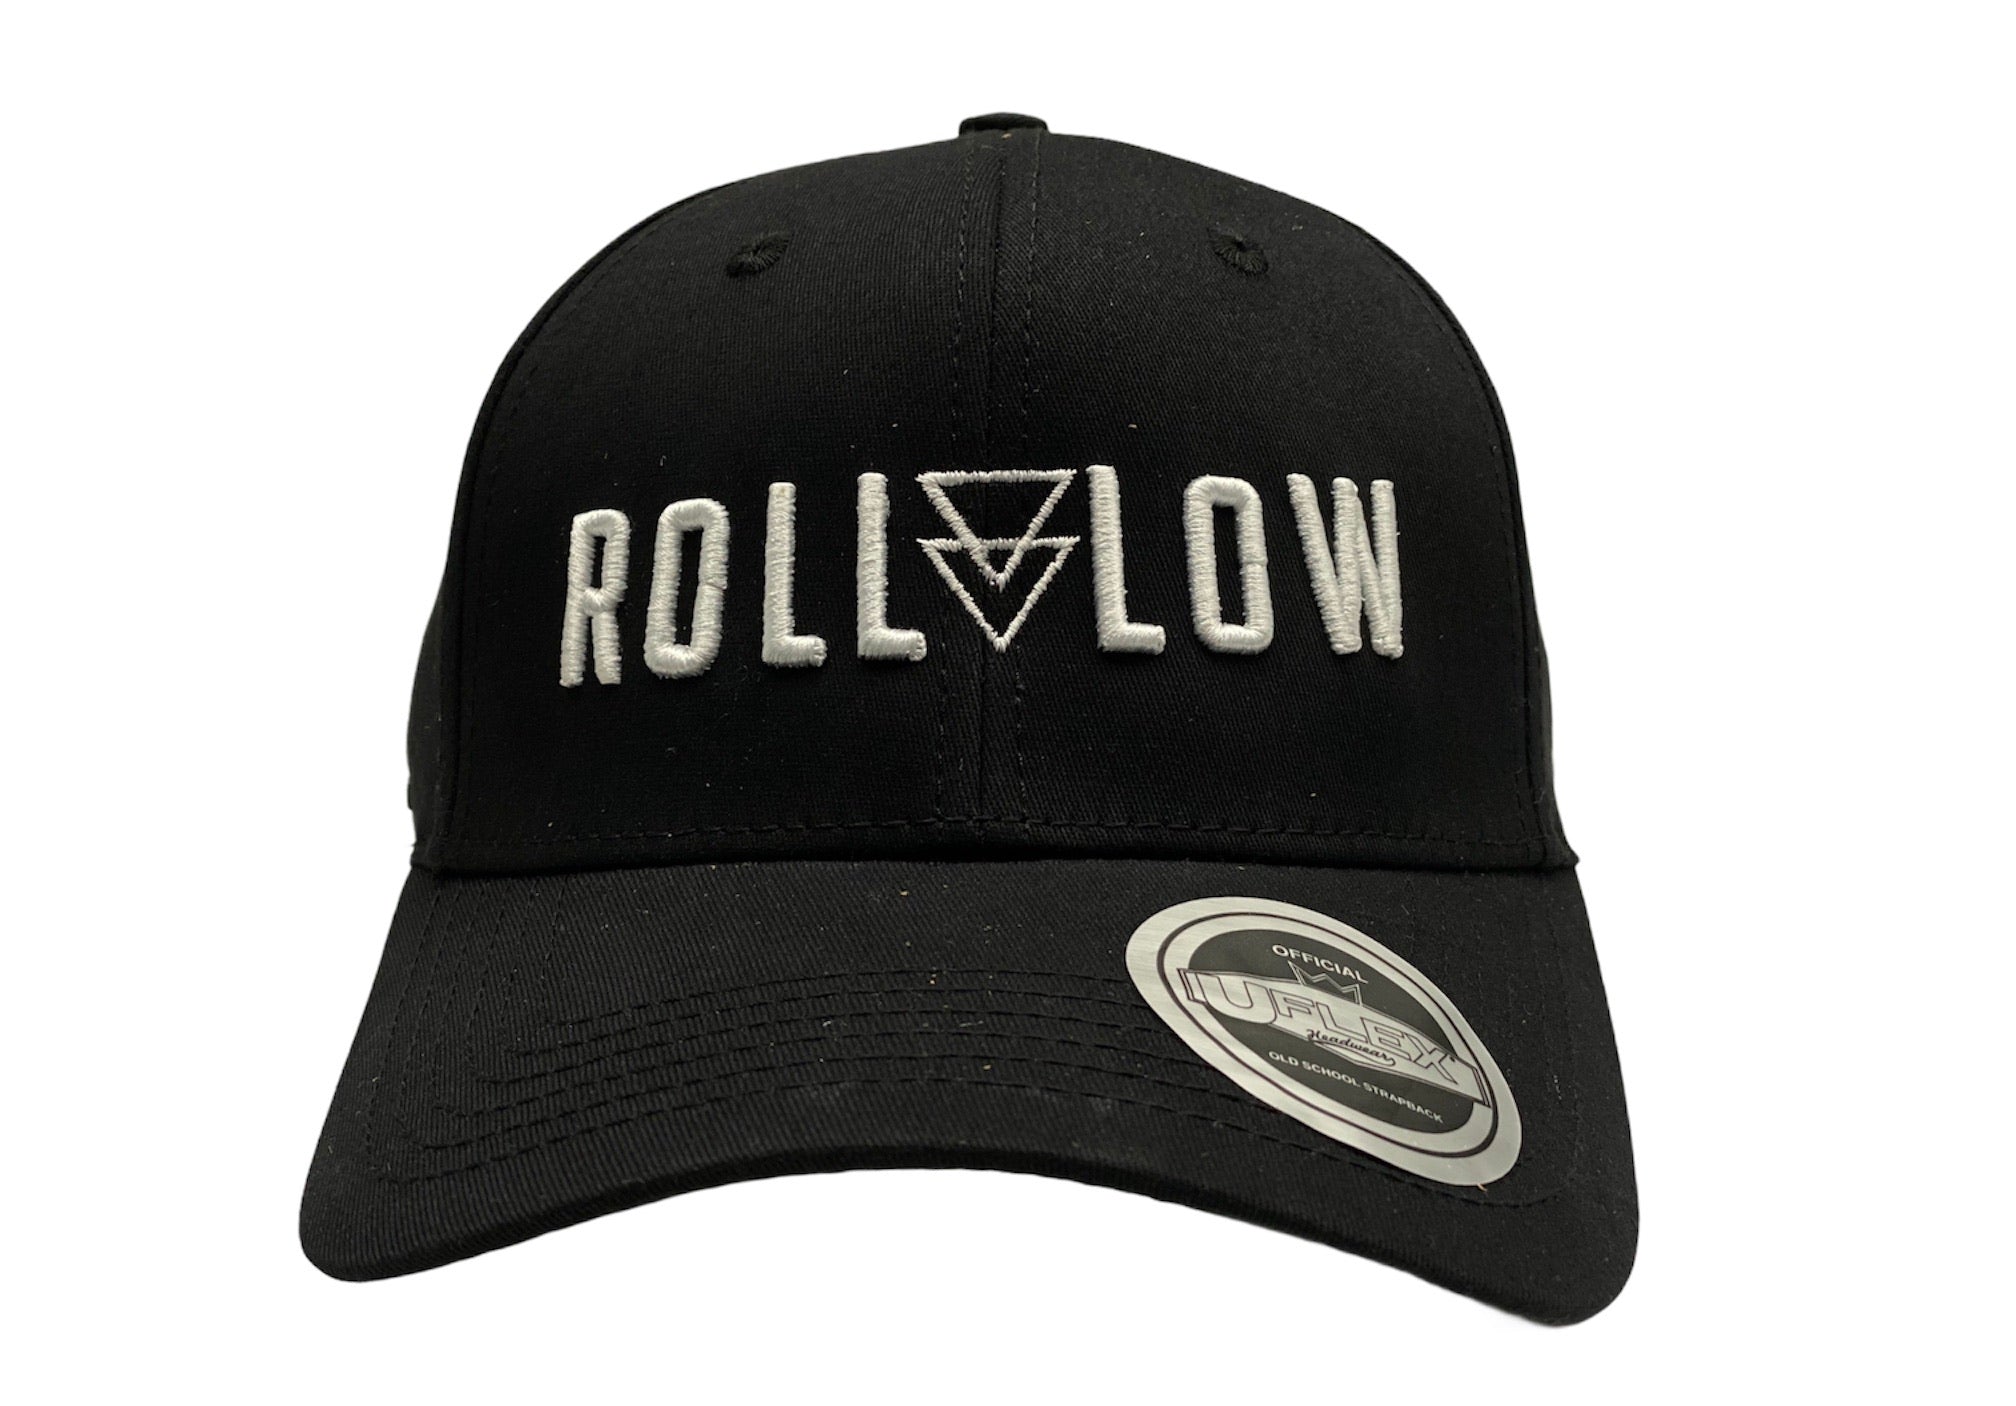 AUTOSTYLING OLD SCHOOL STRAP BACK ROLL LOW